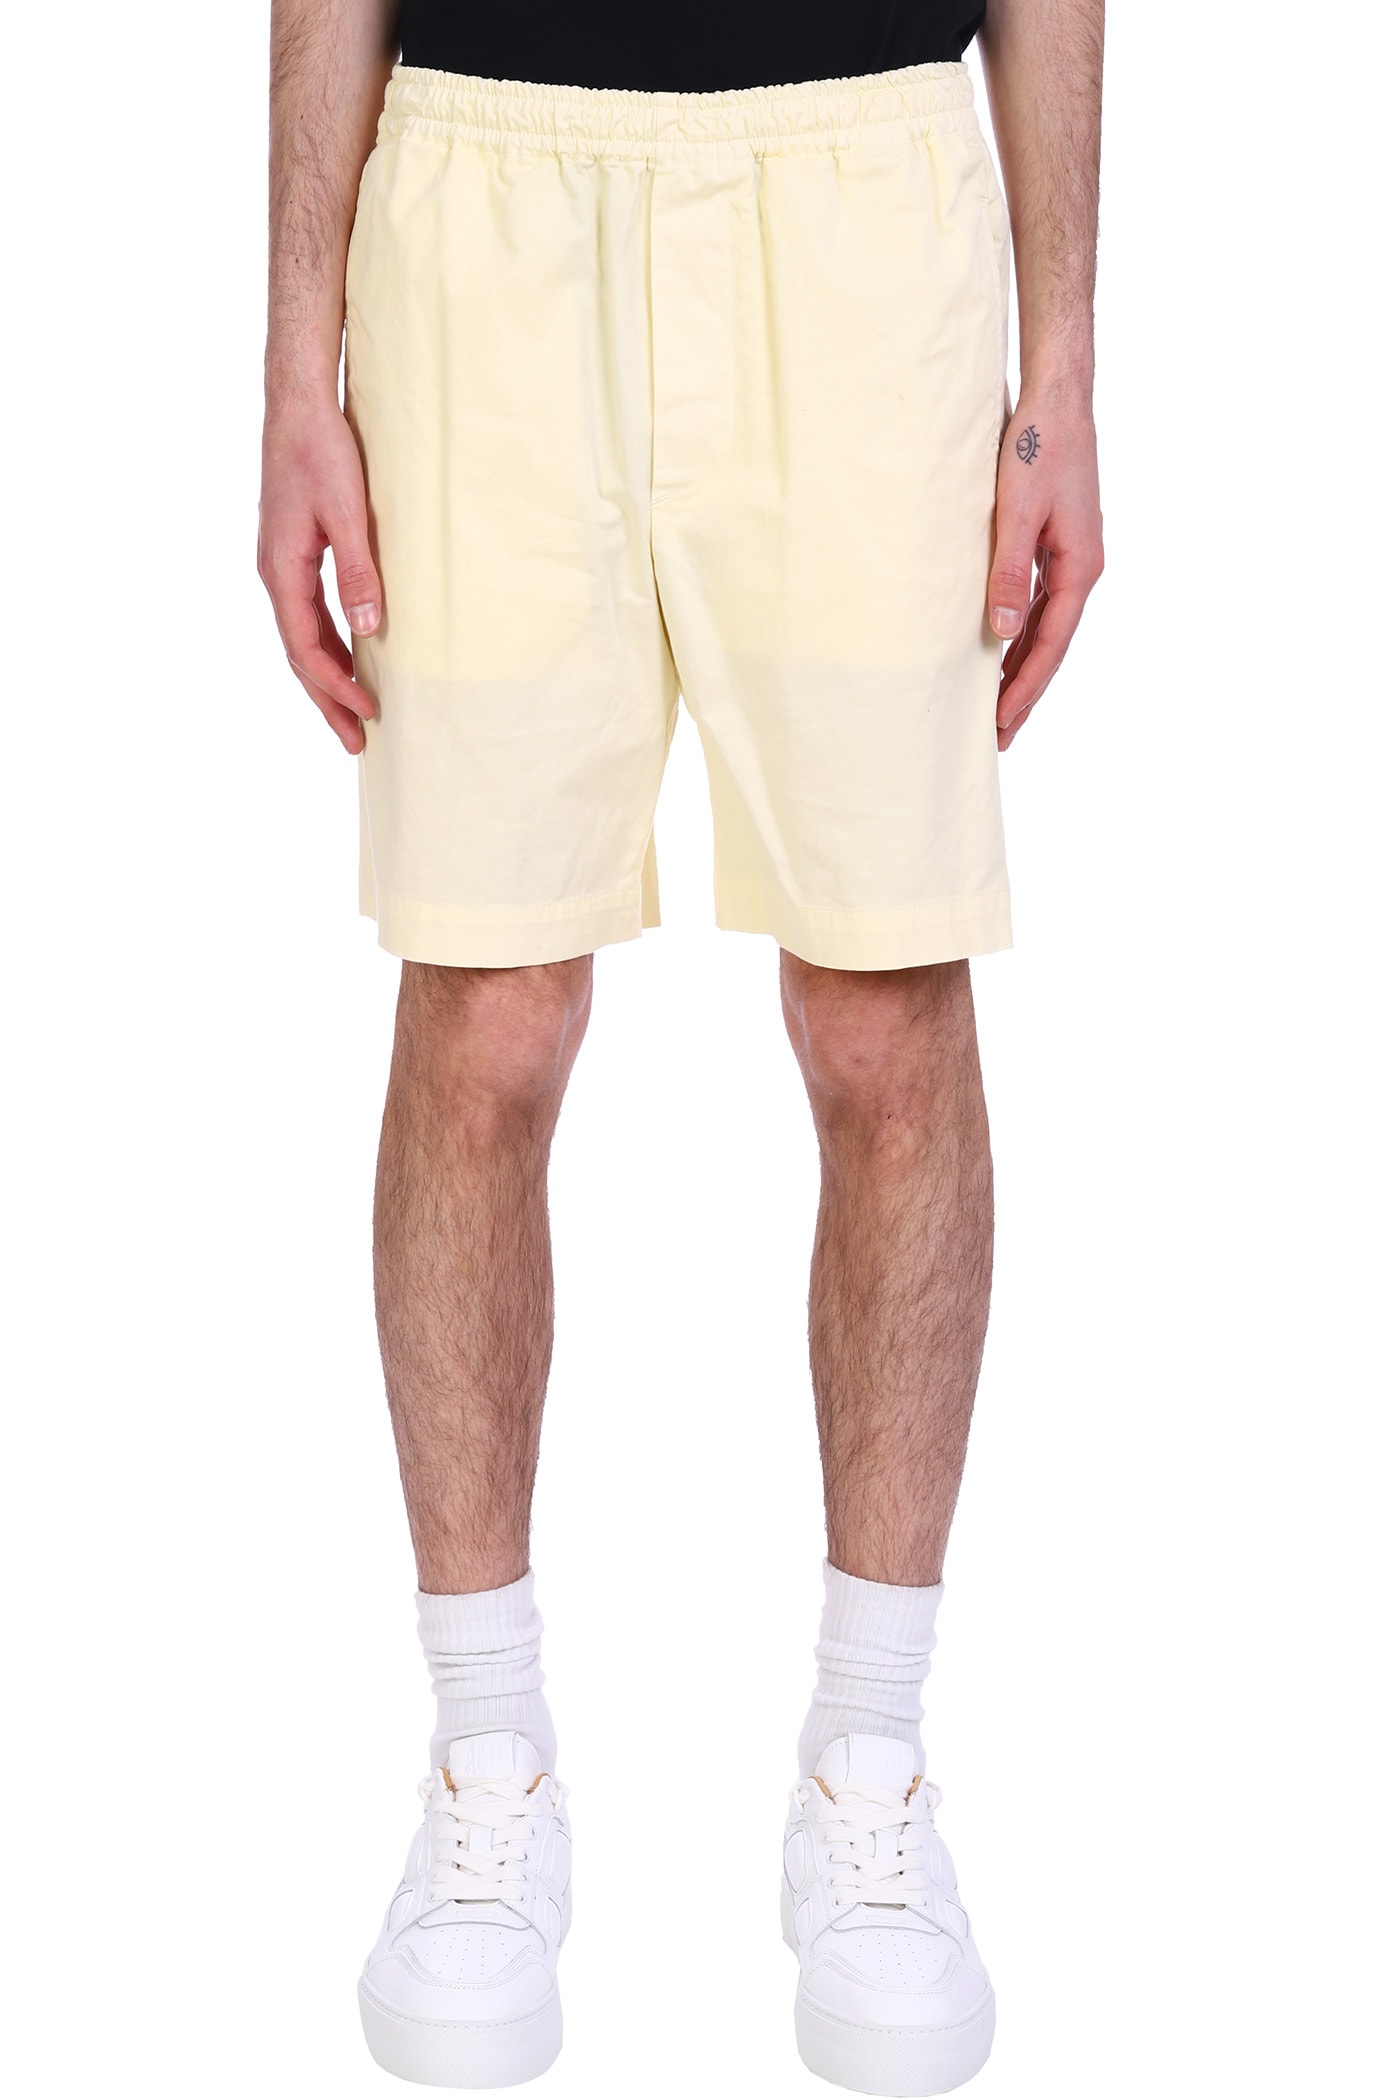 Mauro Grifoni Shorts In Yellow Cotton